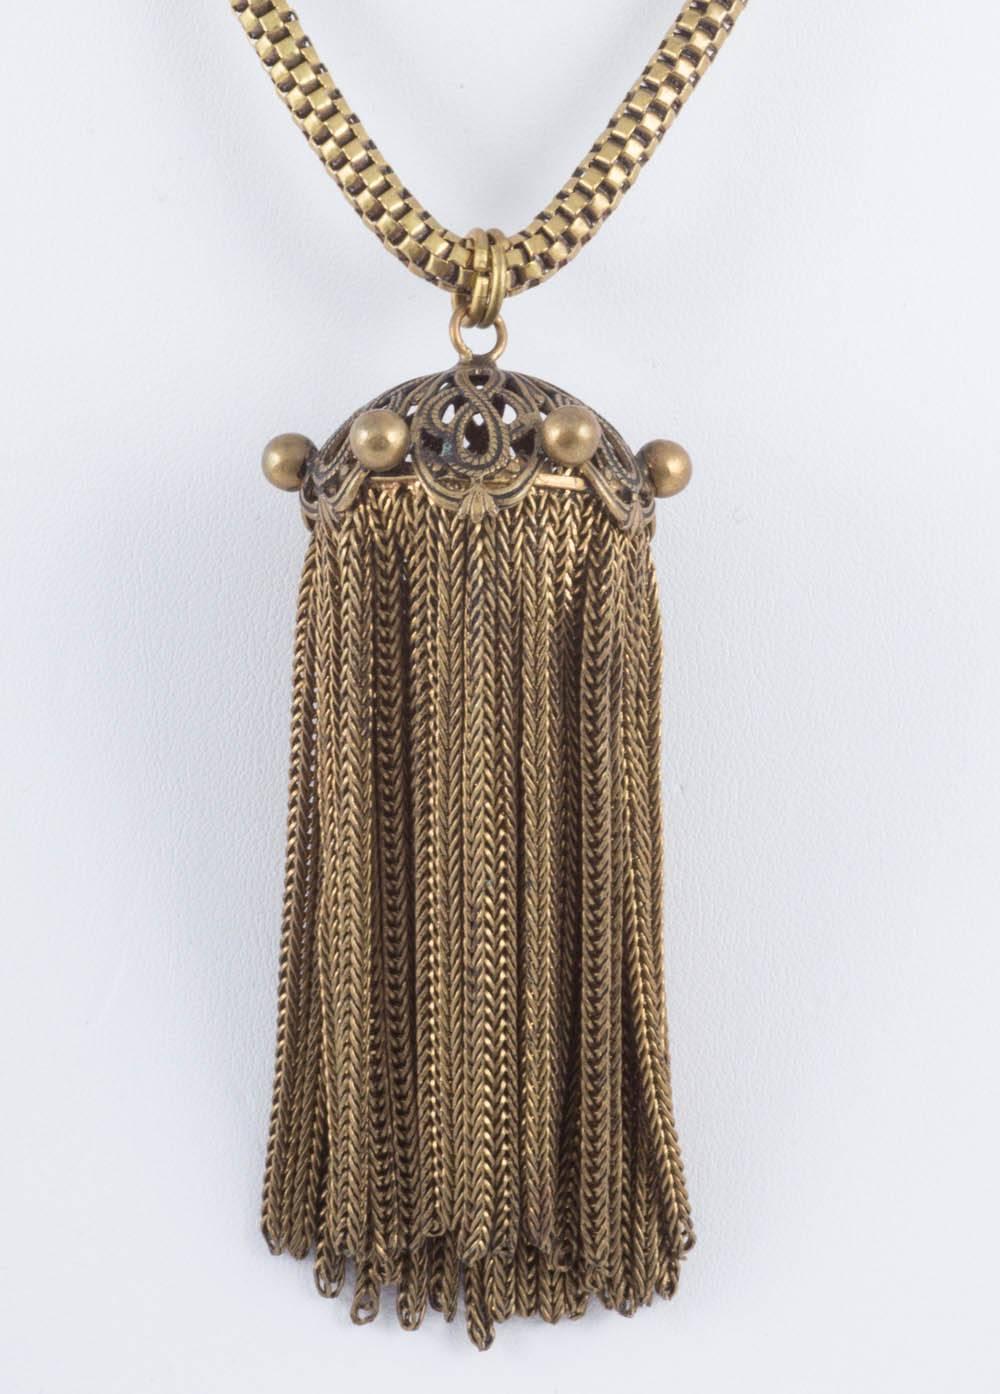 This is an extravagant brass tassle pendant on a collar bone length chain of the same period. They came together, but the pendant would look equally good on a long chain also. The pendant is well made with slinky snake chain ropes making up the